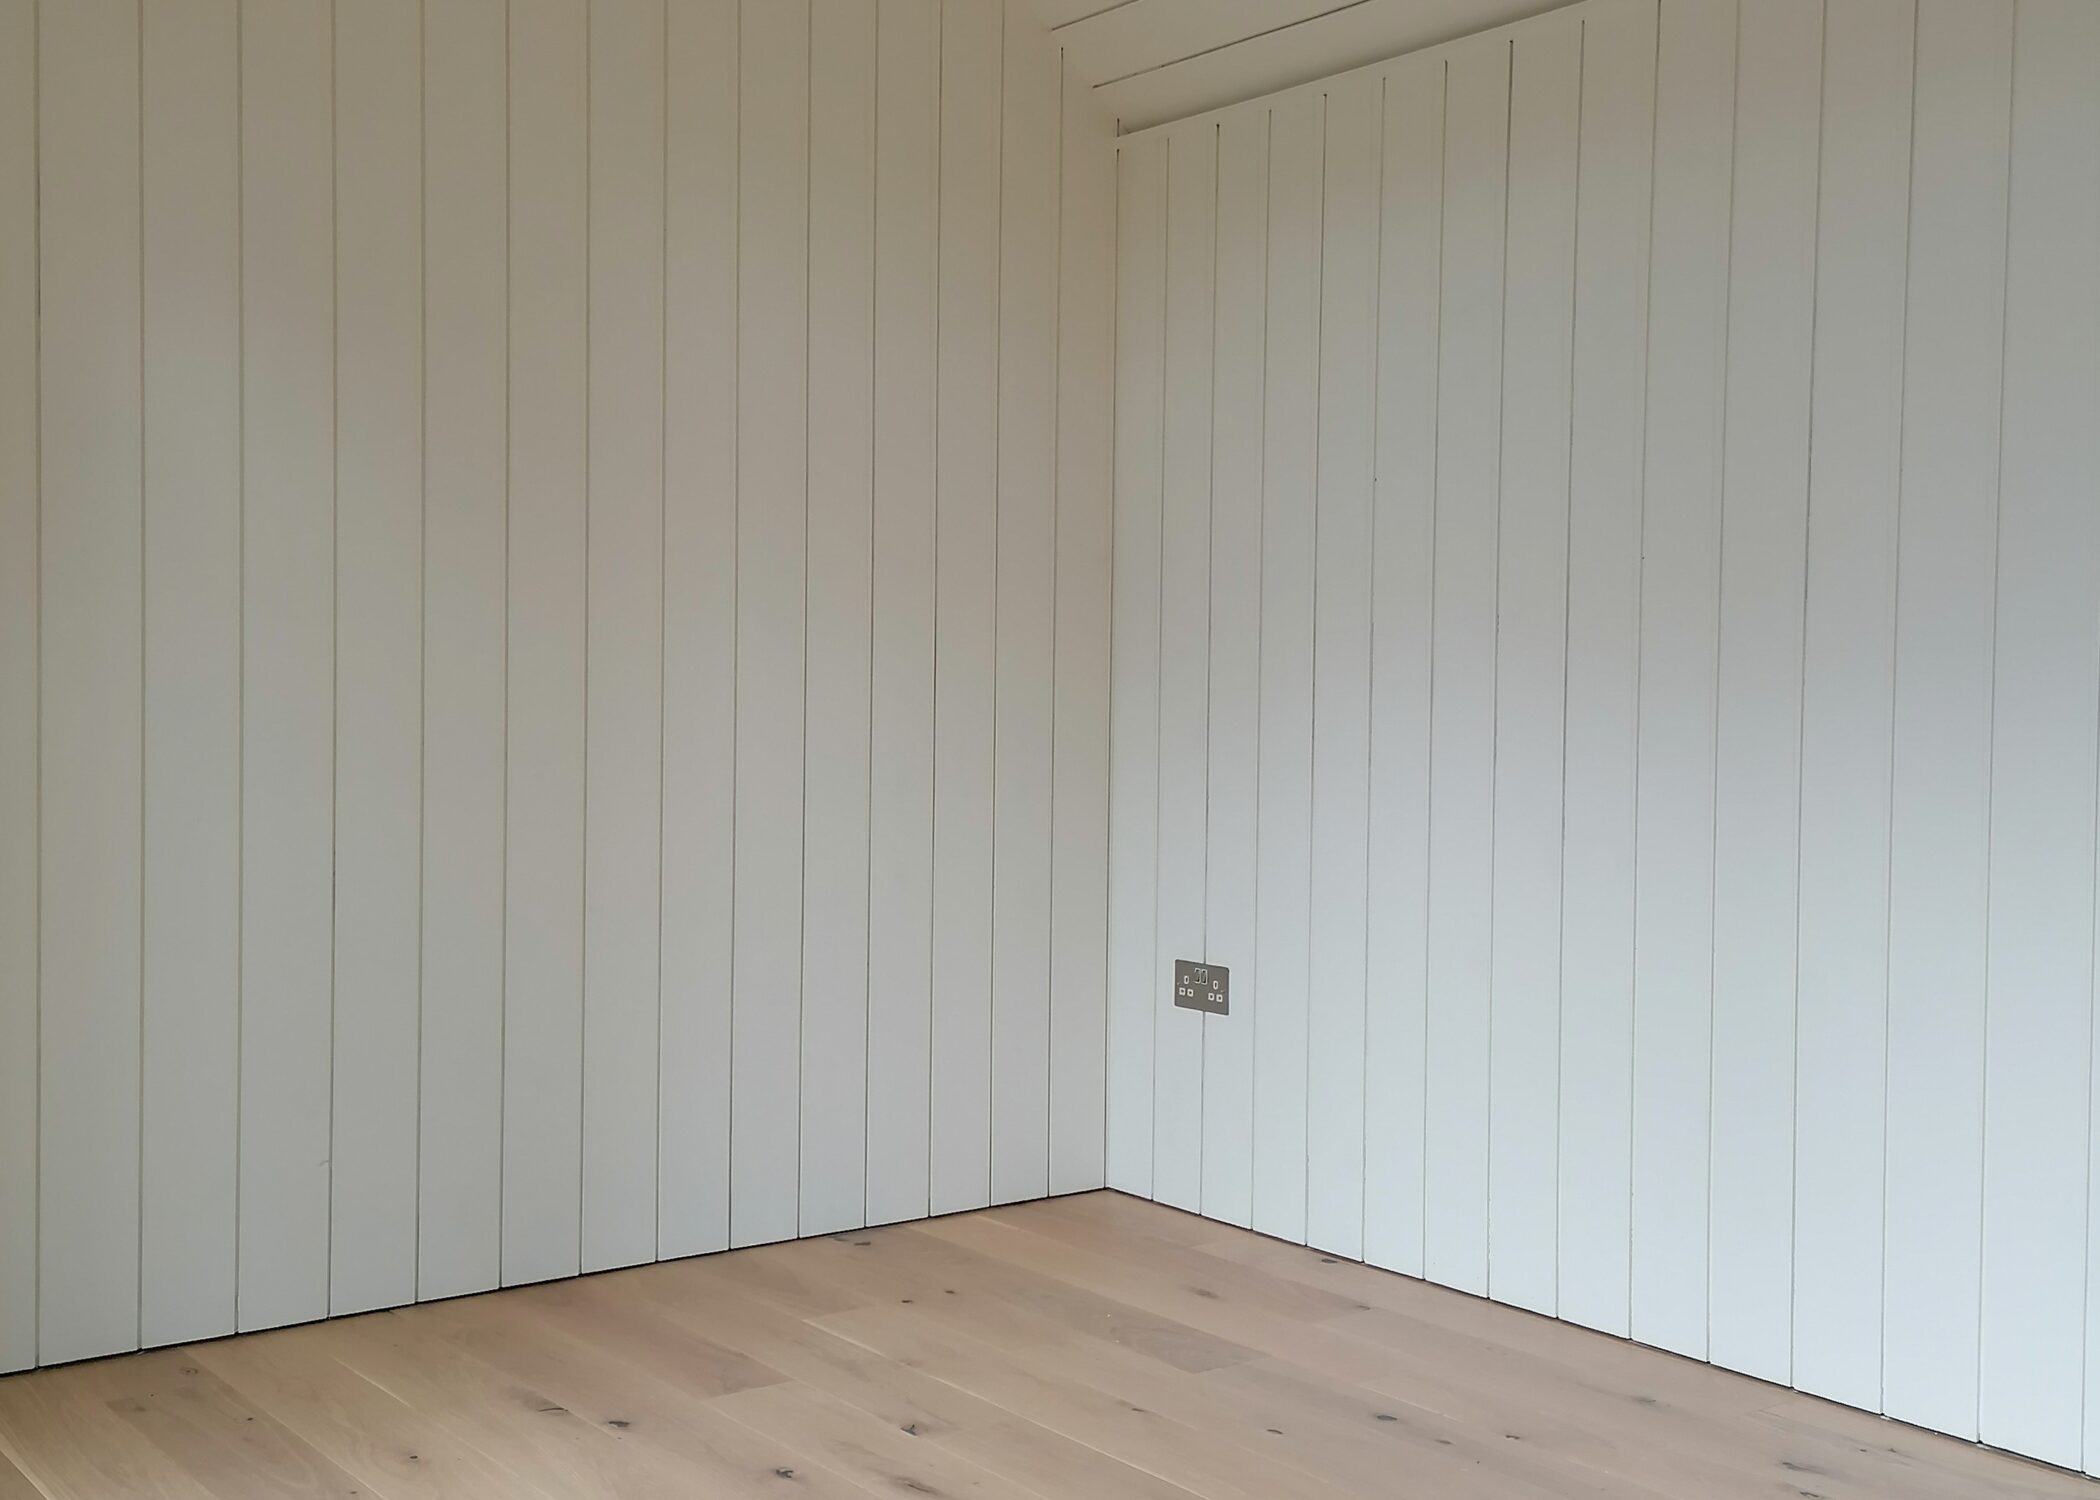 Tamar Cabin. A summerhouse cabin with engineered oak flooring and painted Farrow and Ball Wimborne White timber t&g cladding _Life Space Cabins.jpg (1)